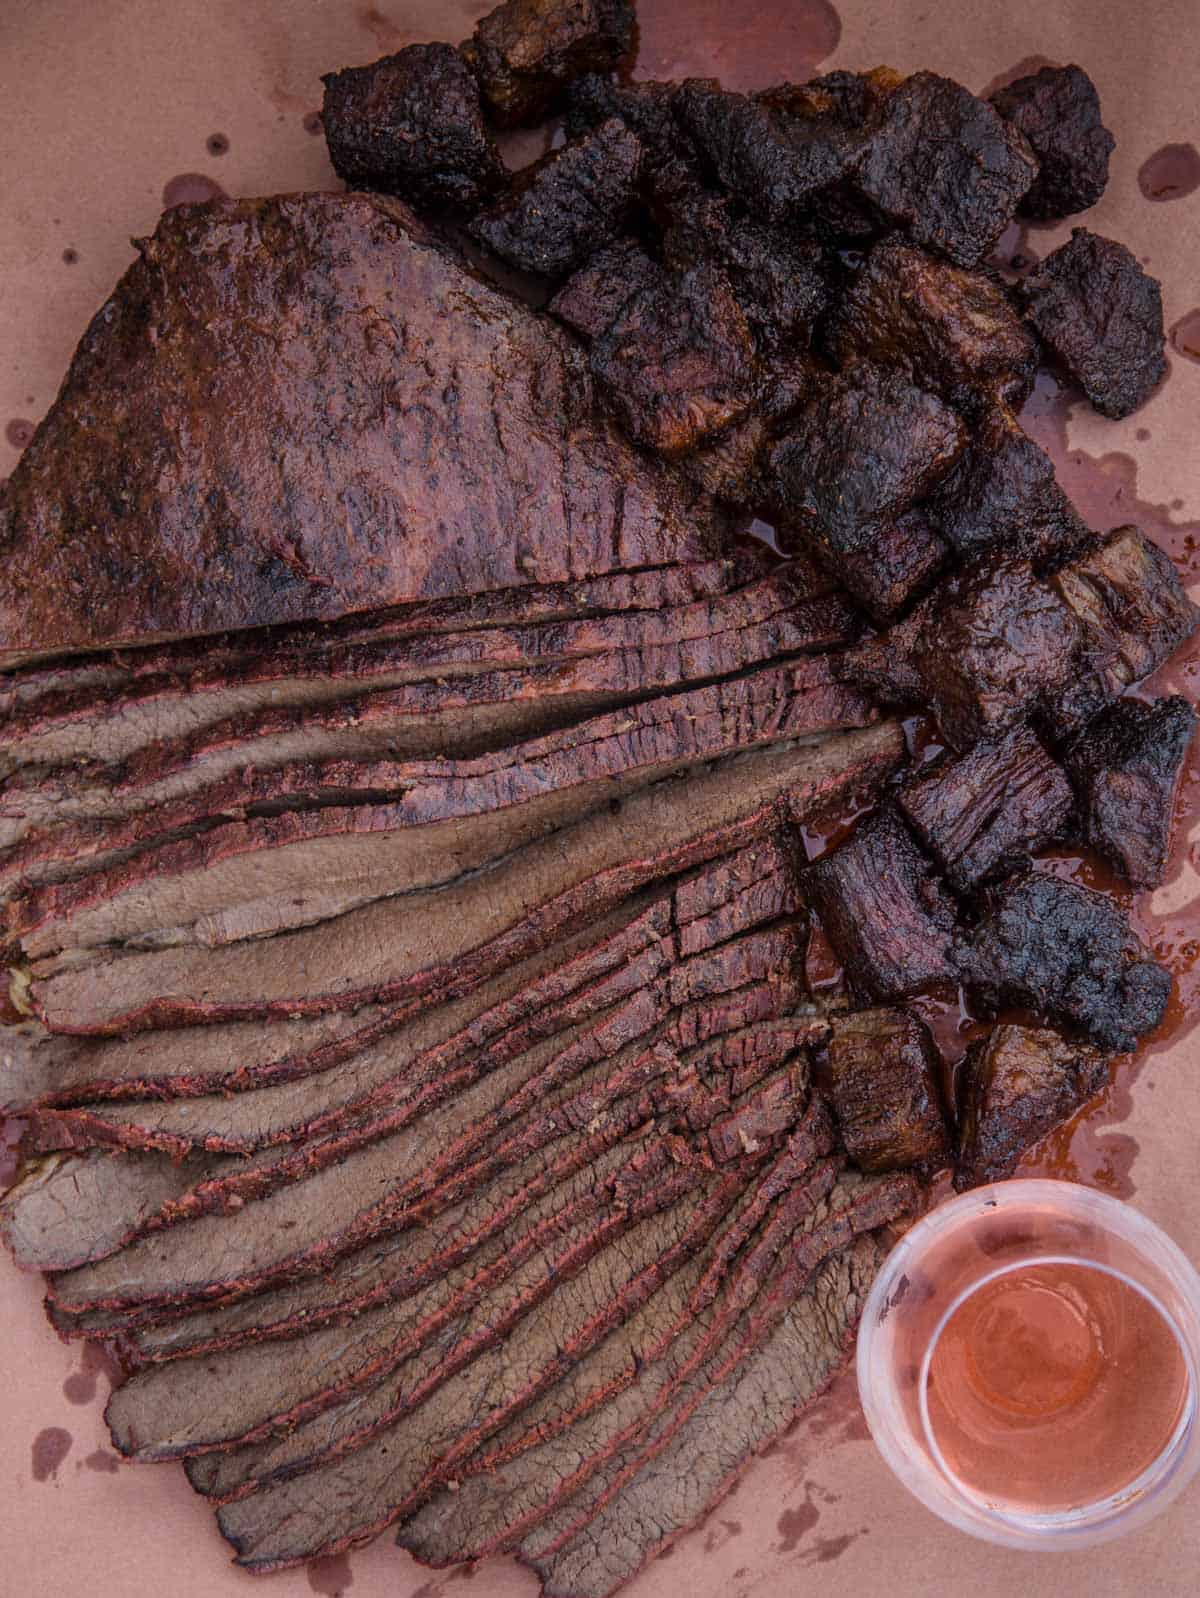 Slices of brisket flat and cubes of BBQ Burnt Ends on a serving dish with a glass of wine